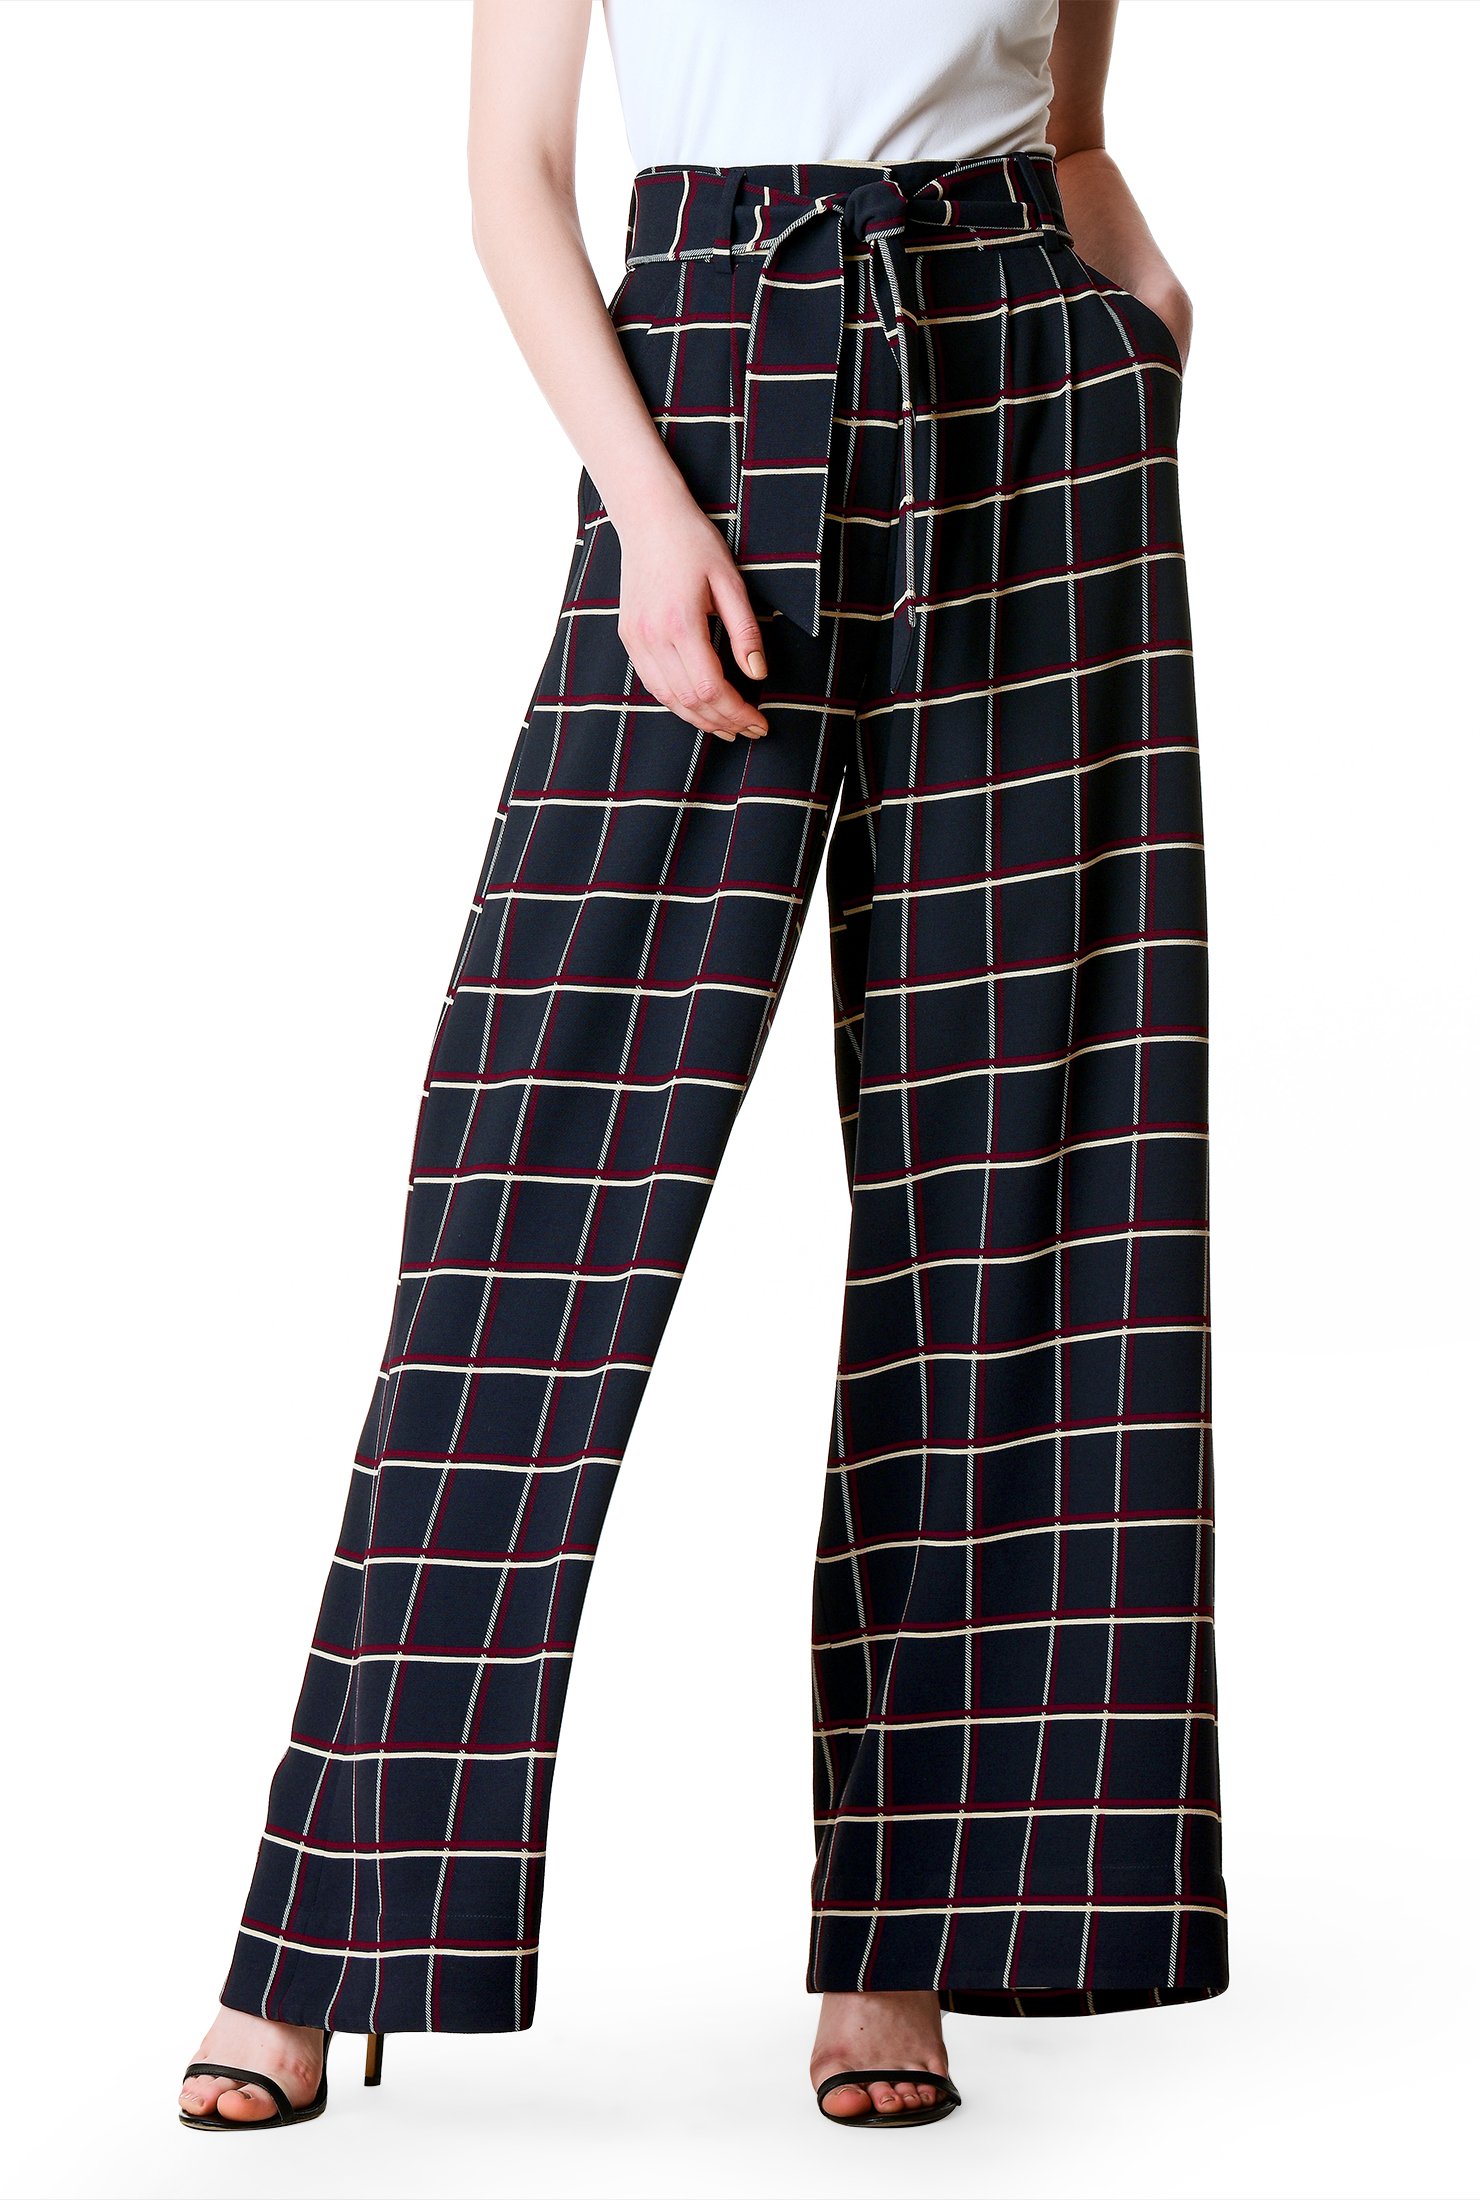 Y2k American Retro Straight Wide Leg Pants Pink White Plaid Design Casual  Pants Loose hot Girls Cargo Pants (Pink,S,Small) at Amazon Women's Clothing  store